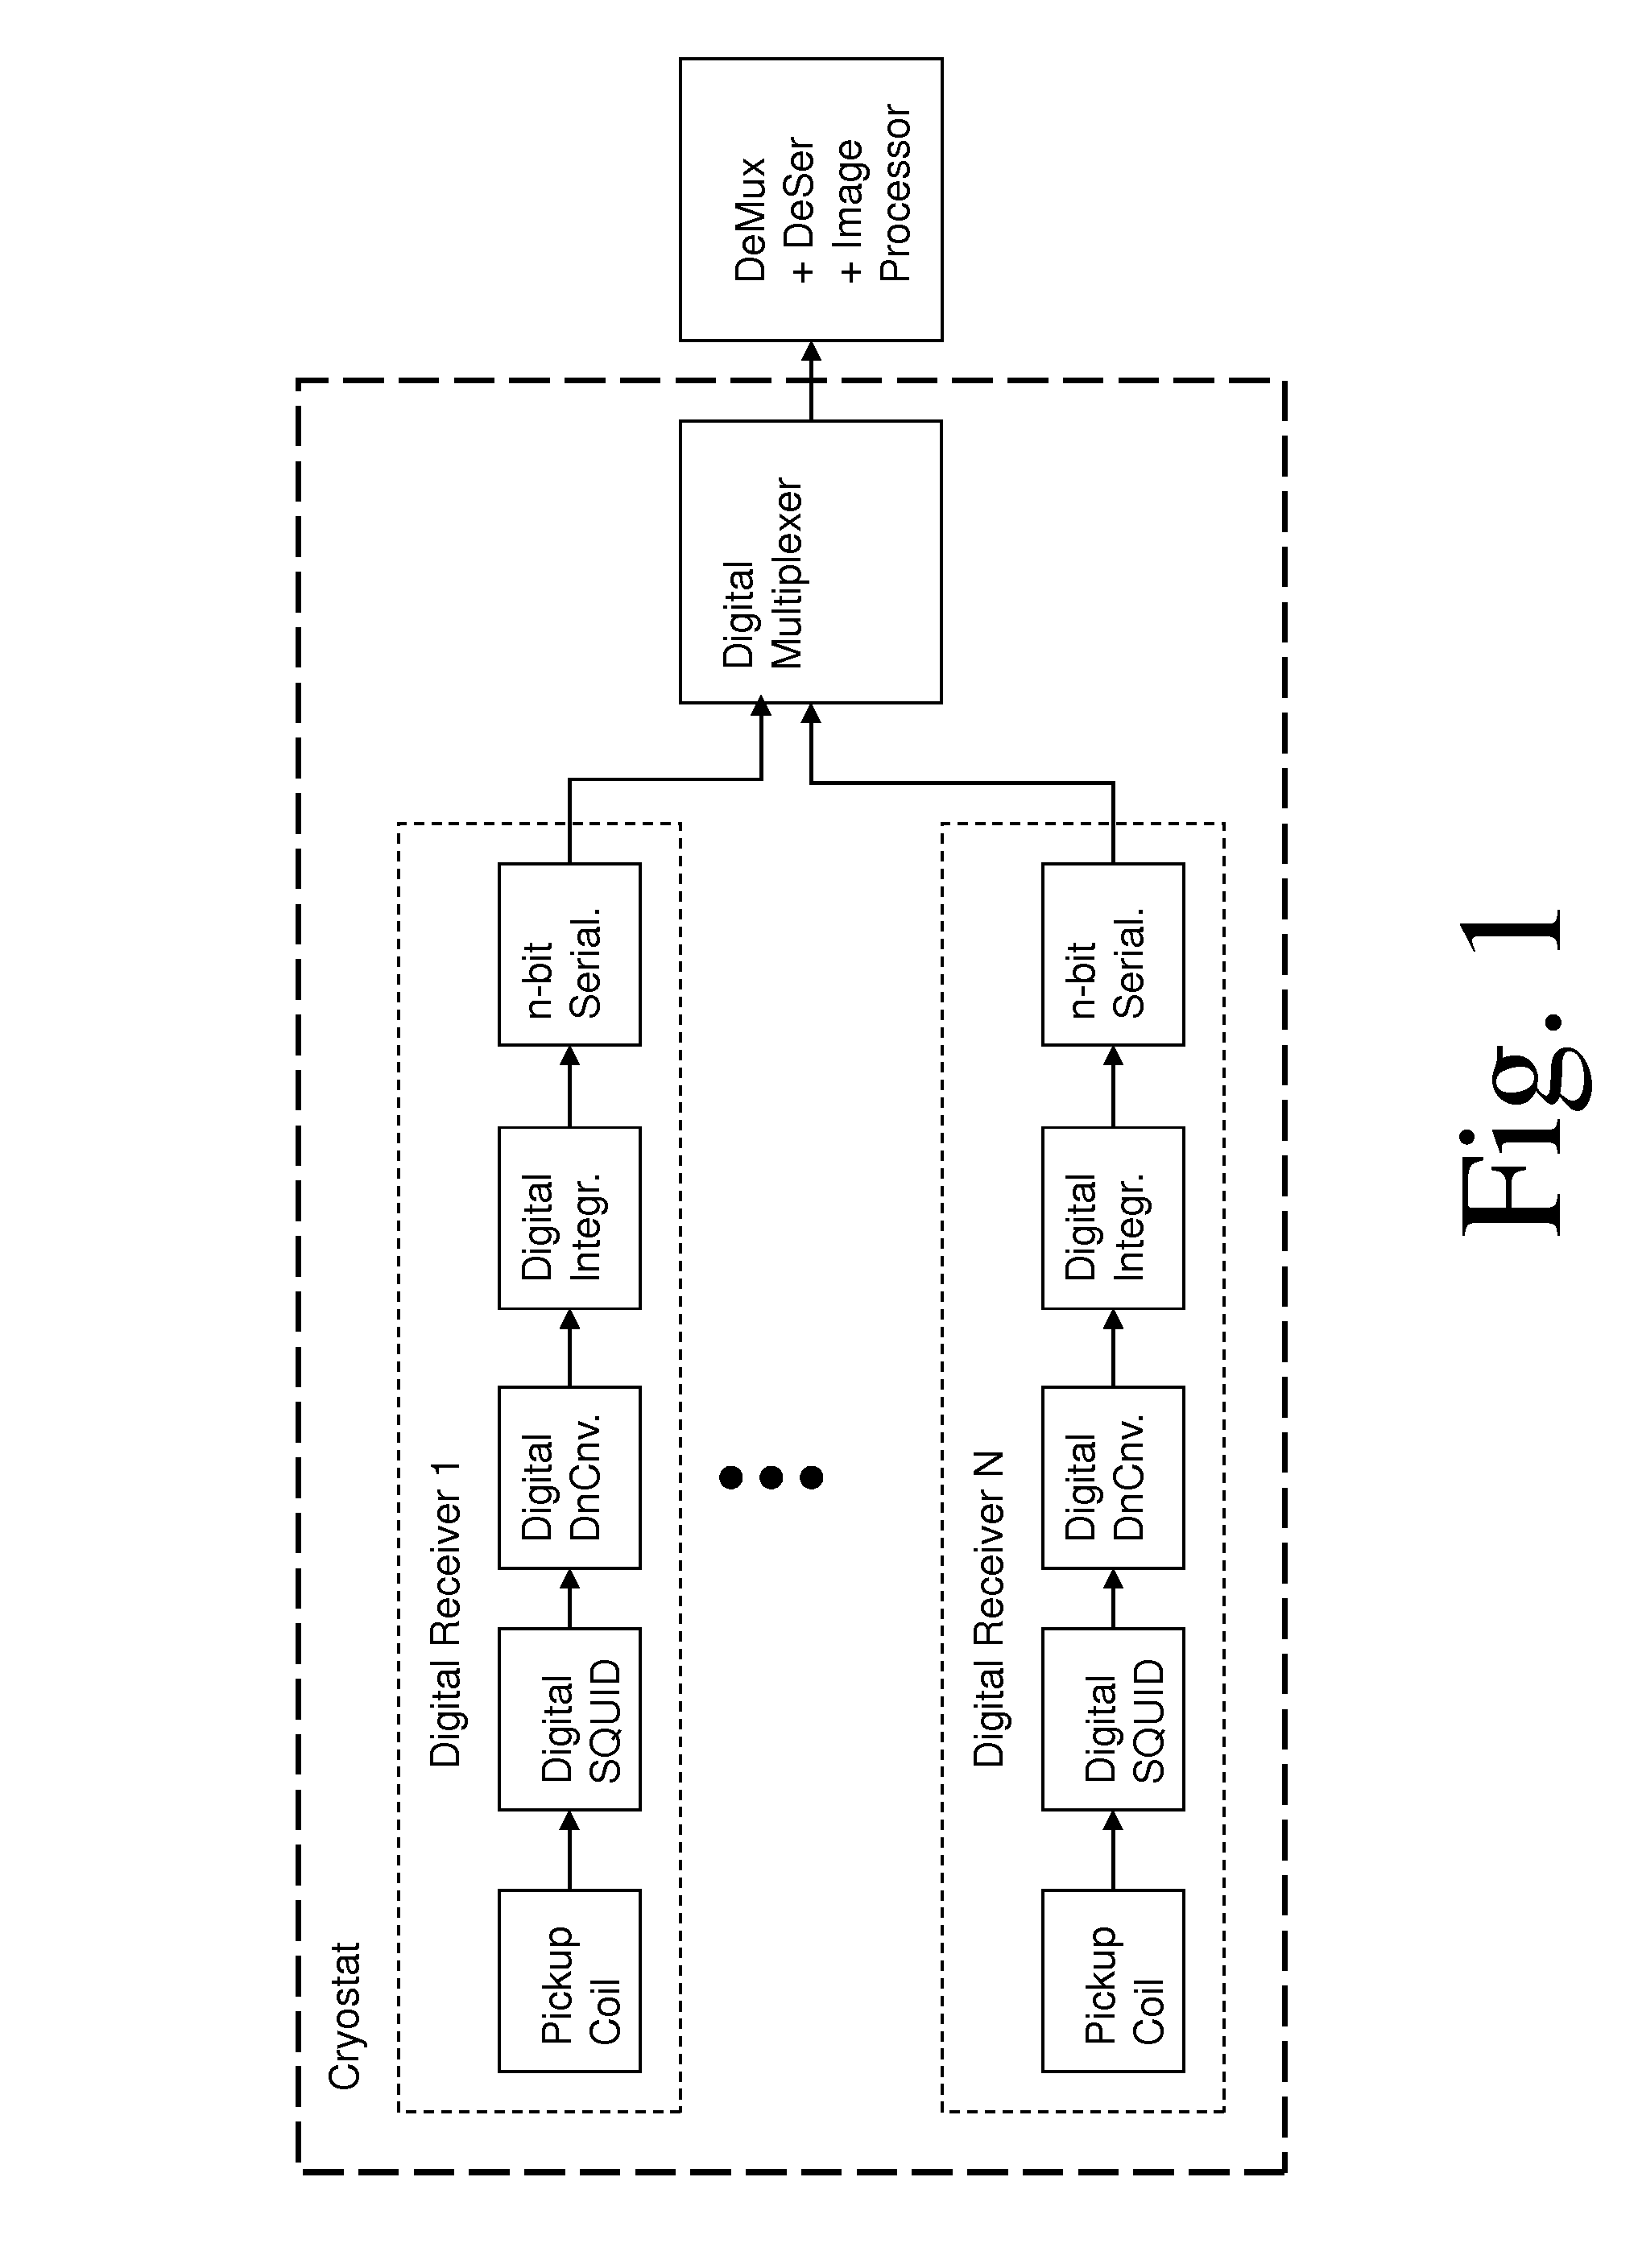 Magnetic resonance system and method employing a digital squid